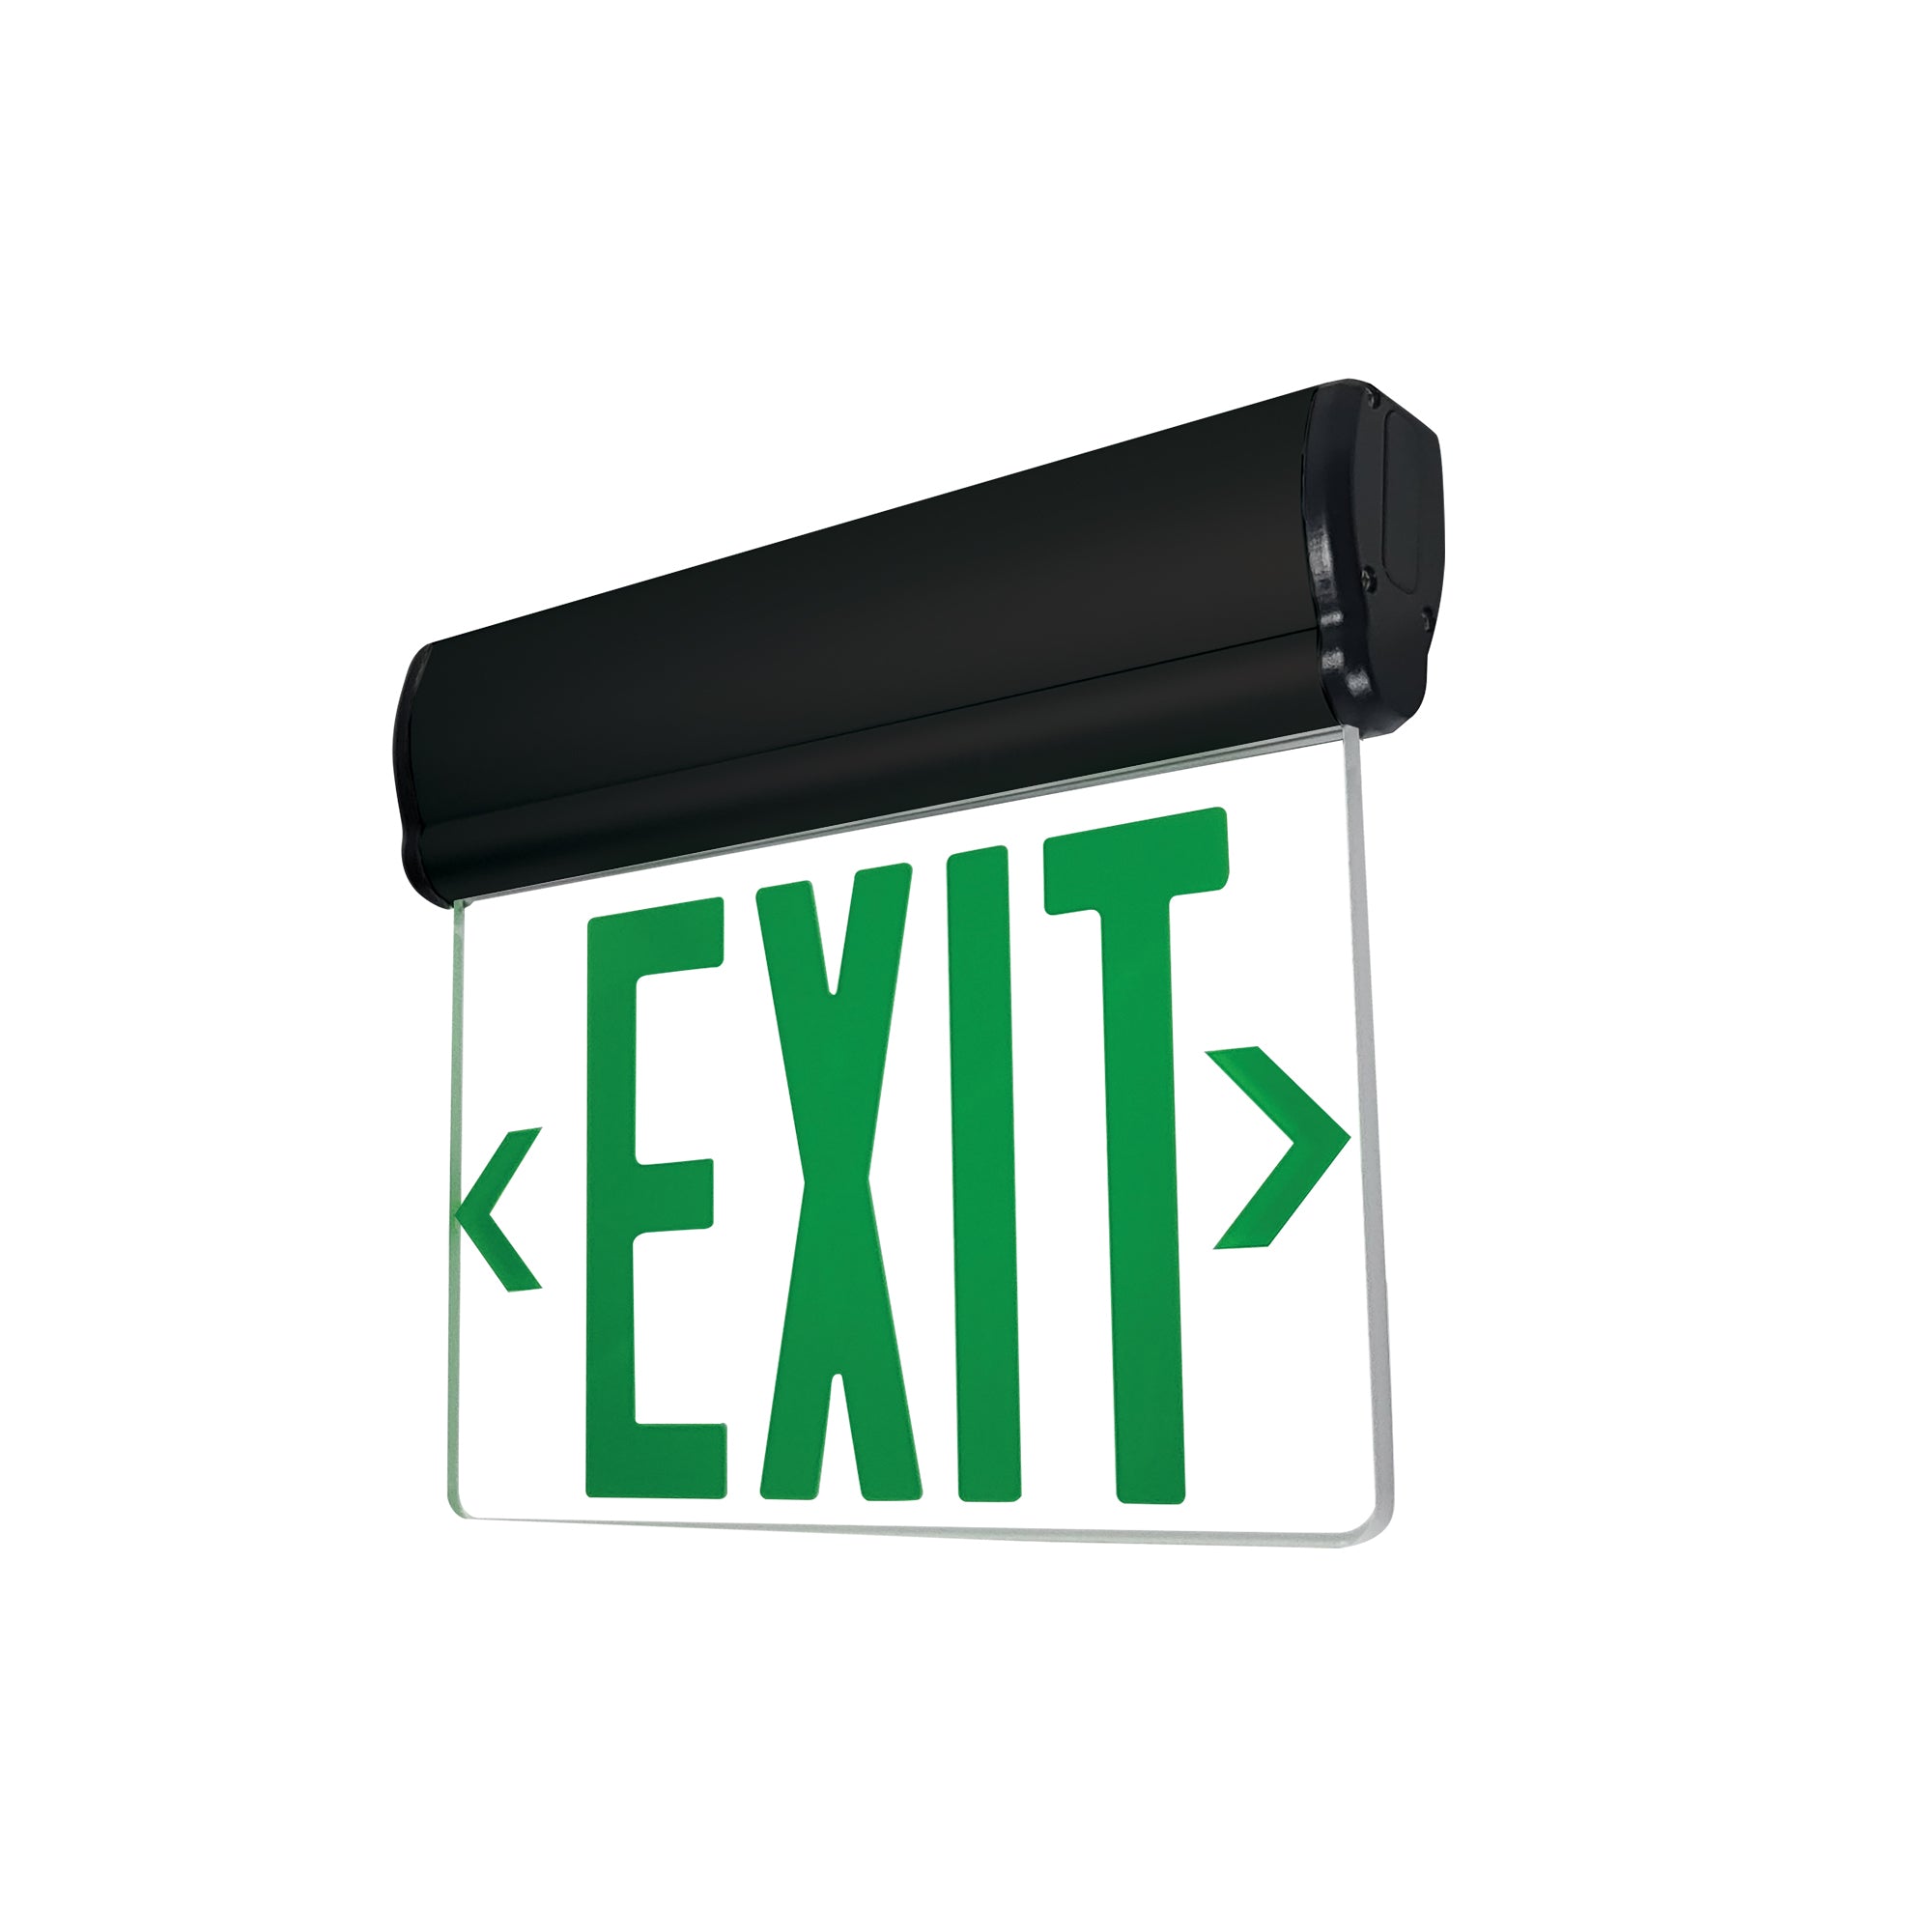 Nora Lighting NX-811-LEDGCB - Exit / Emergency - Surface Adjustable LED Edge-Lit Exit Sign, 2 Circuity, 6 Inch Green Letters, Single Face / Clear Acrylic, Black Housing